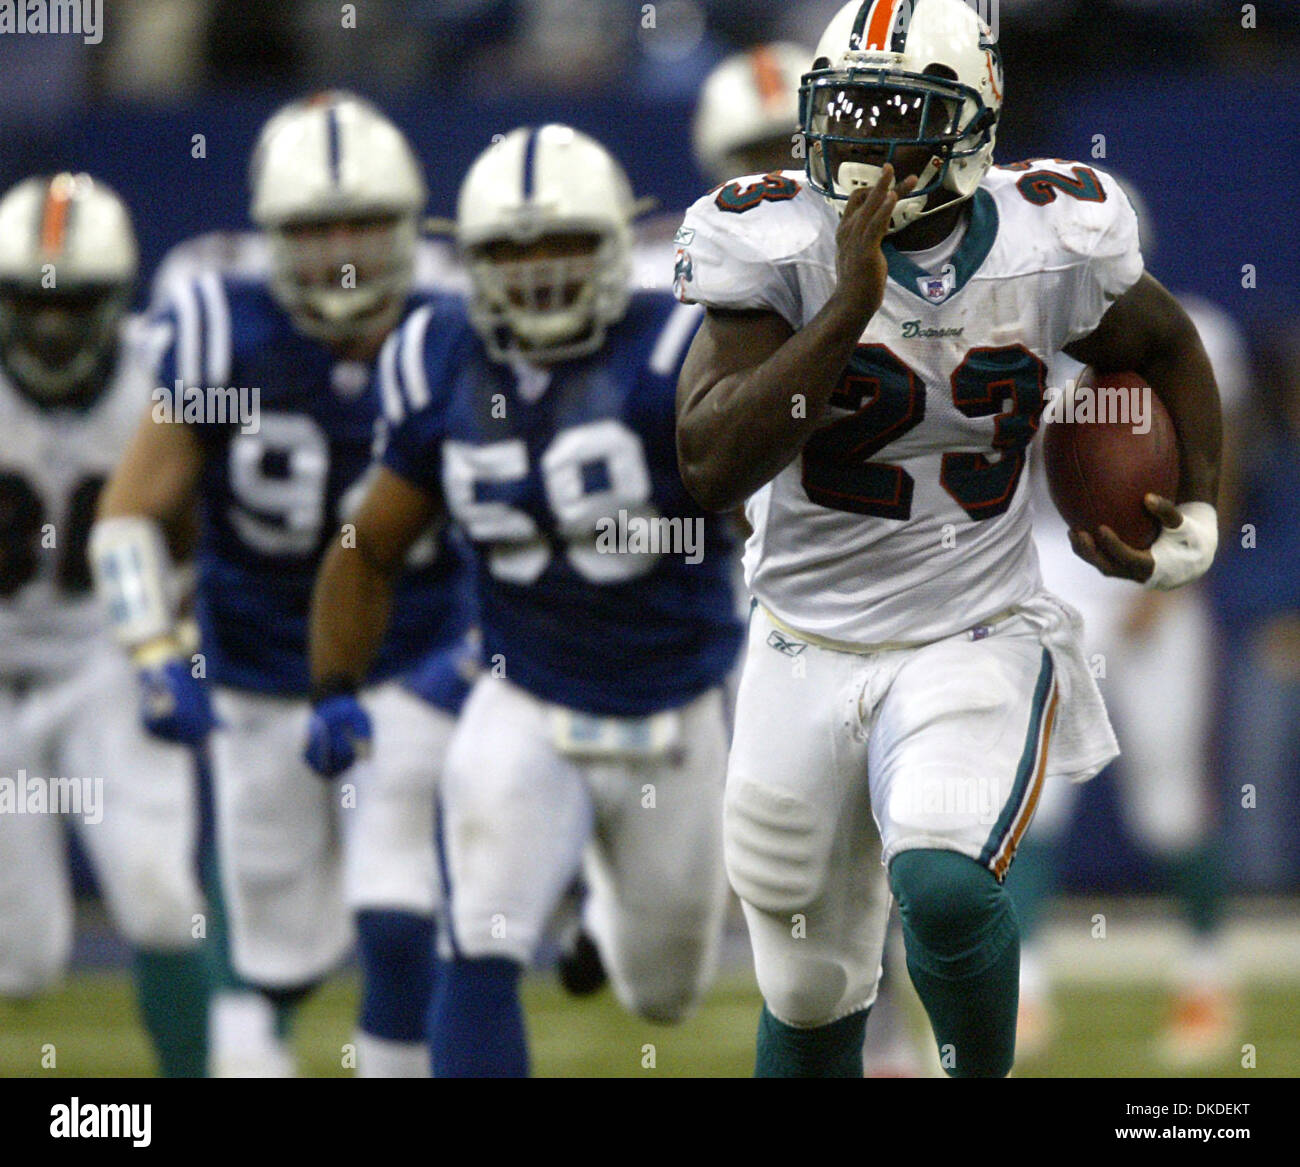 Dec 31, 2006; Indianapolis, IN, USA; Dolphins running back RONNIE BROWN breaks away for a long gain in Sunday's game against the Colts at the RCA Dome.  Mandatory Credit: Photo by Damon Higgins/Palm Beach Post/ZUMA Press. (©) Copyright 2006 by Palm Beach Post Stock Photo